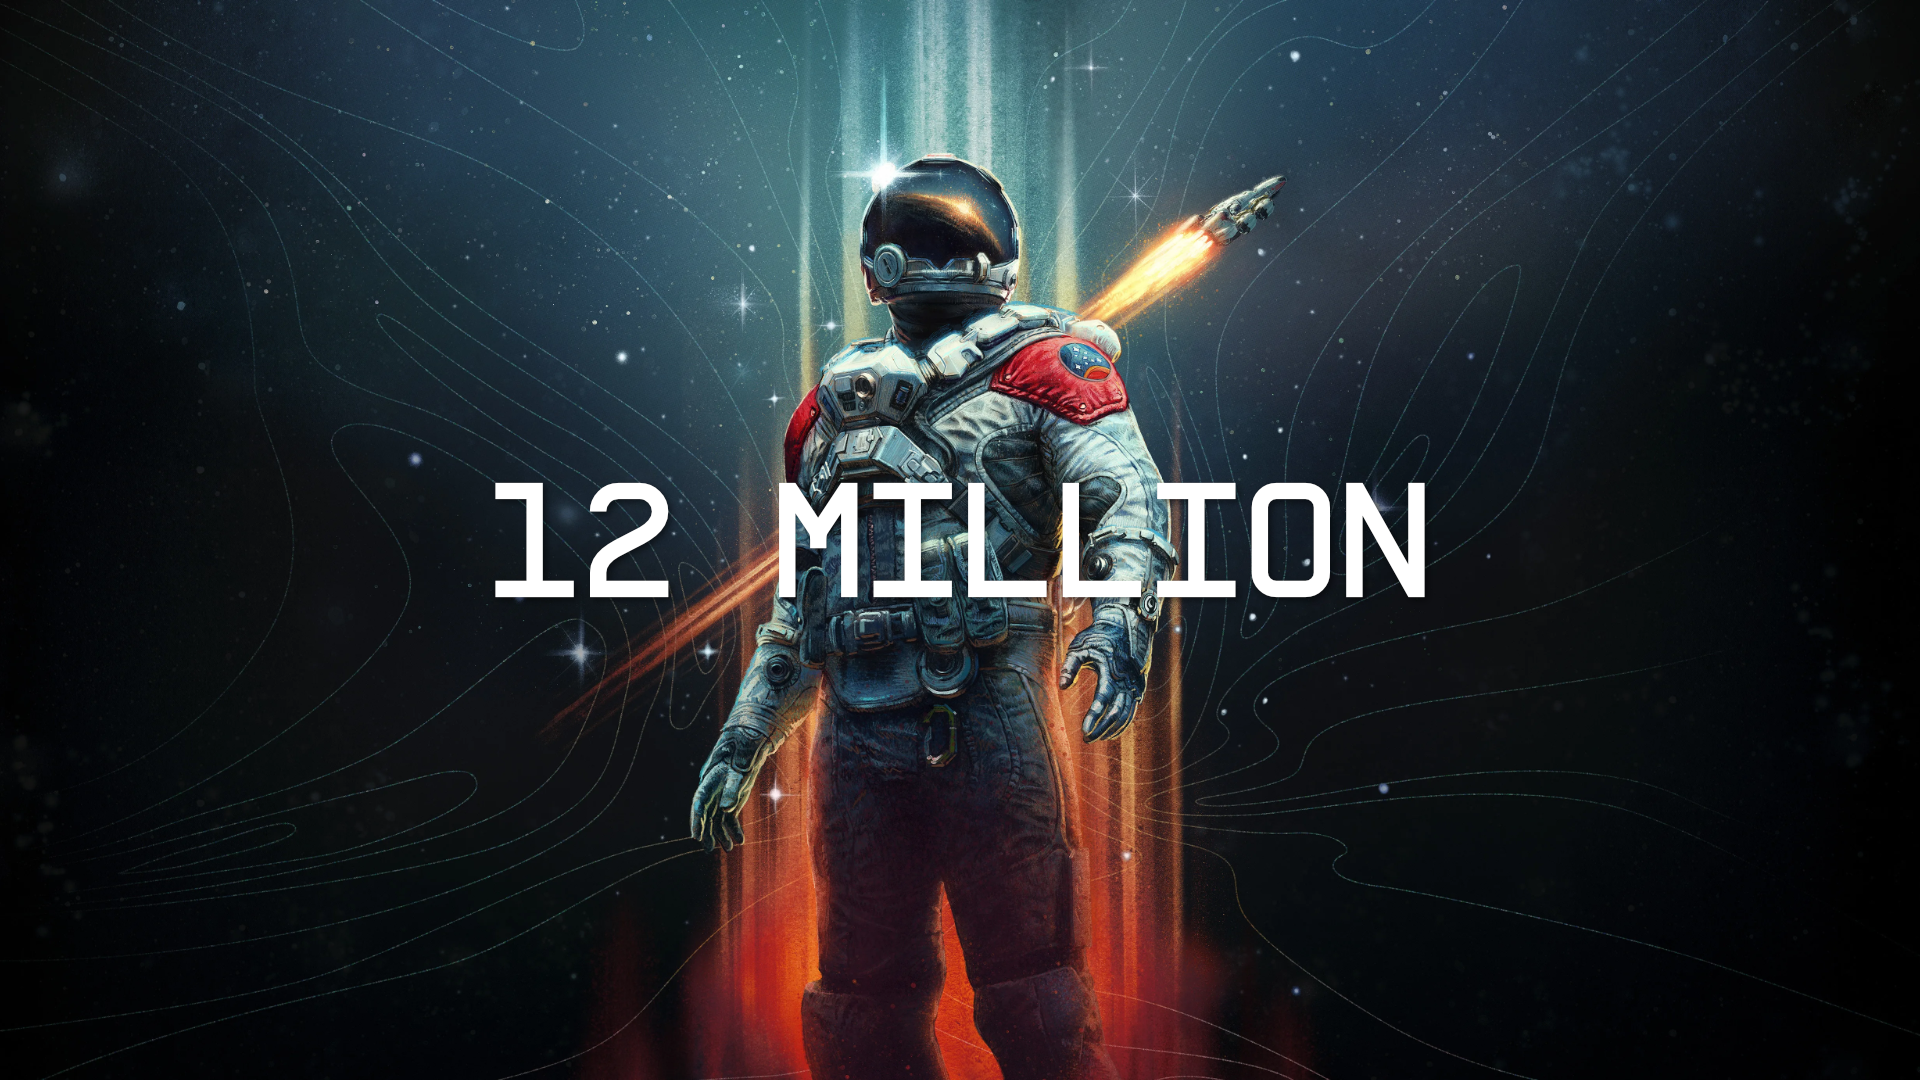 Starfield Has Surpassed 12 Million Players; Goal Is to Last as